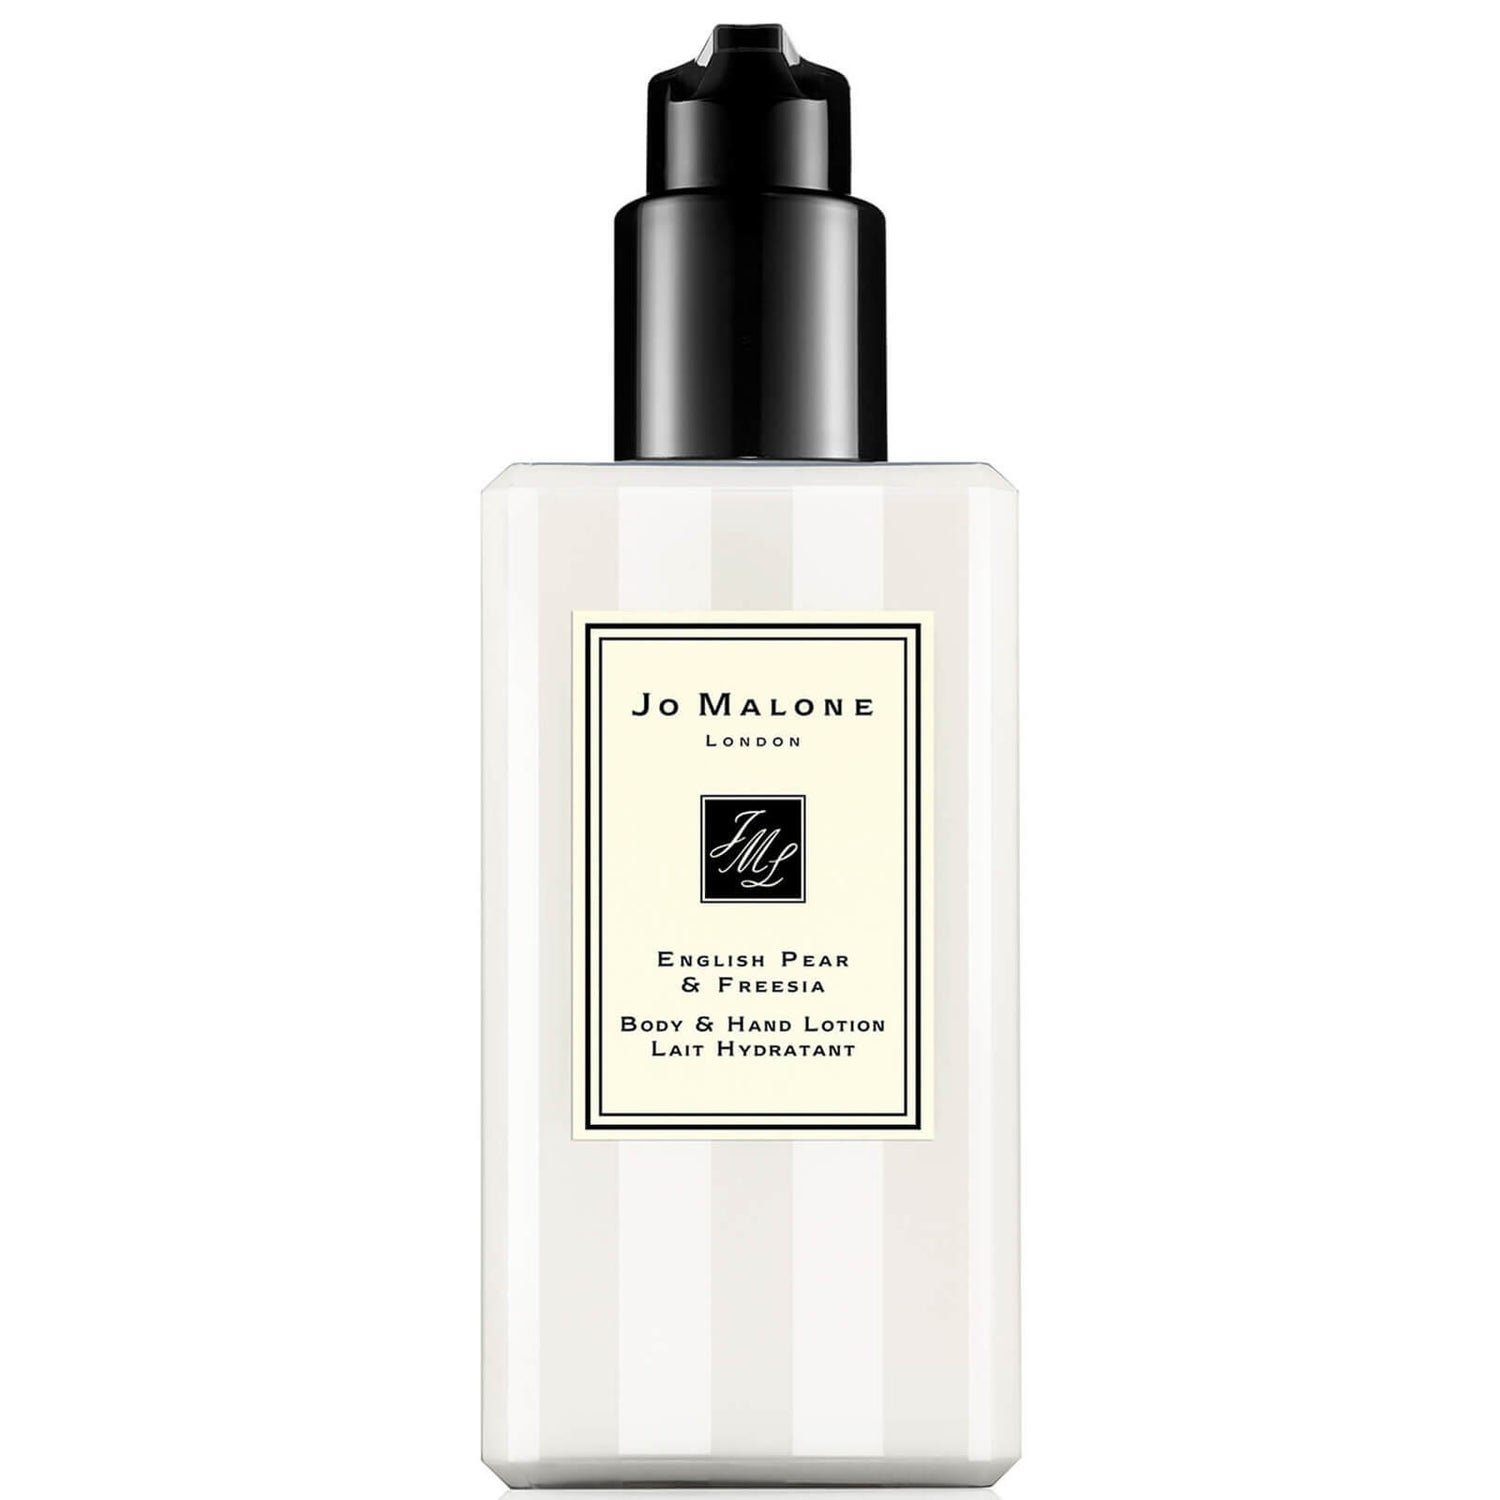 Jo Malone London English Pear and Freesia Body and Hand Lotion 250ml